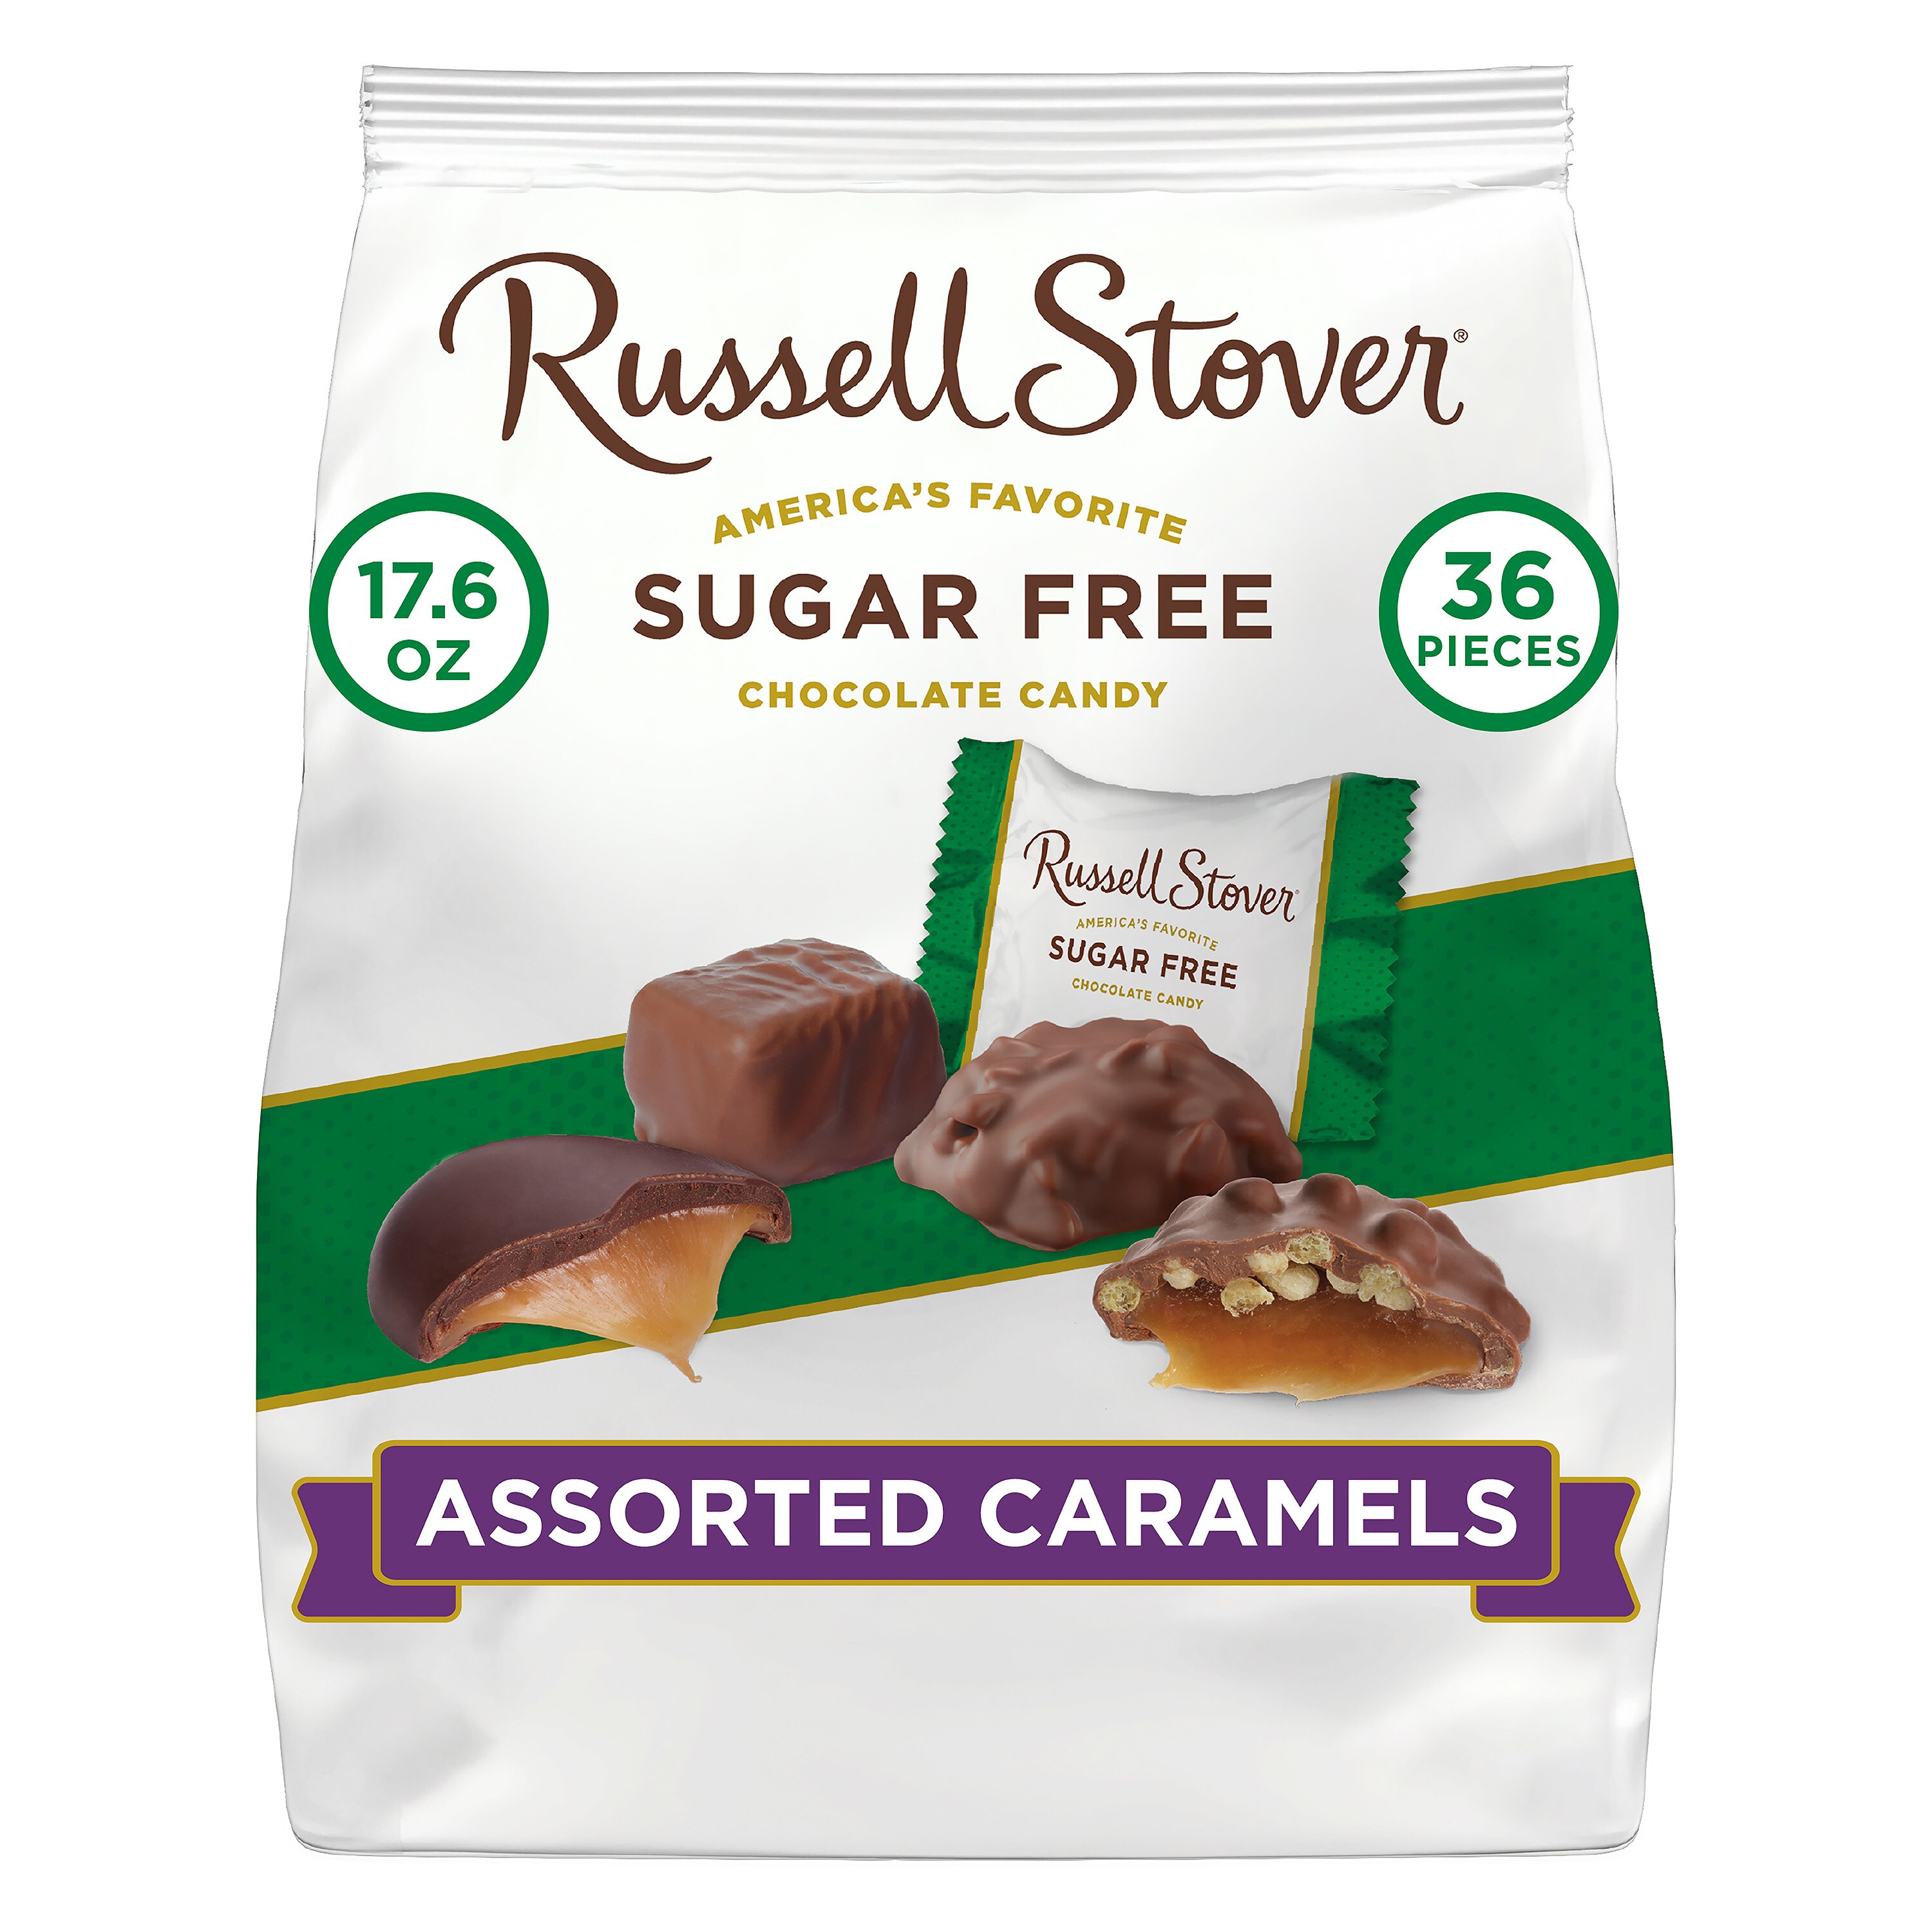 Russell Stover Sugar Free Assorted Caramels with Stevia, 17.6 OZ